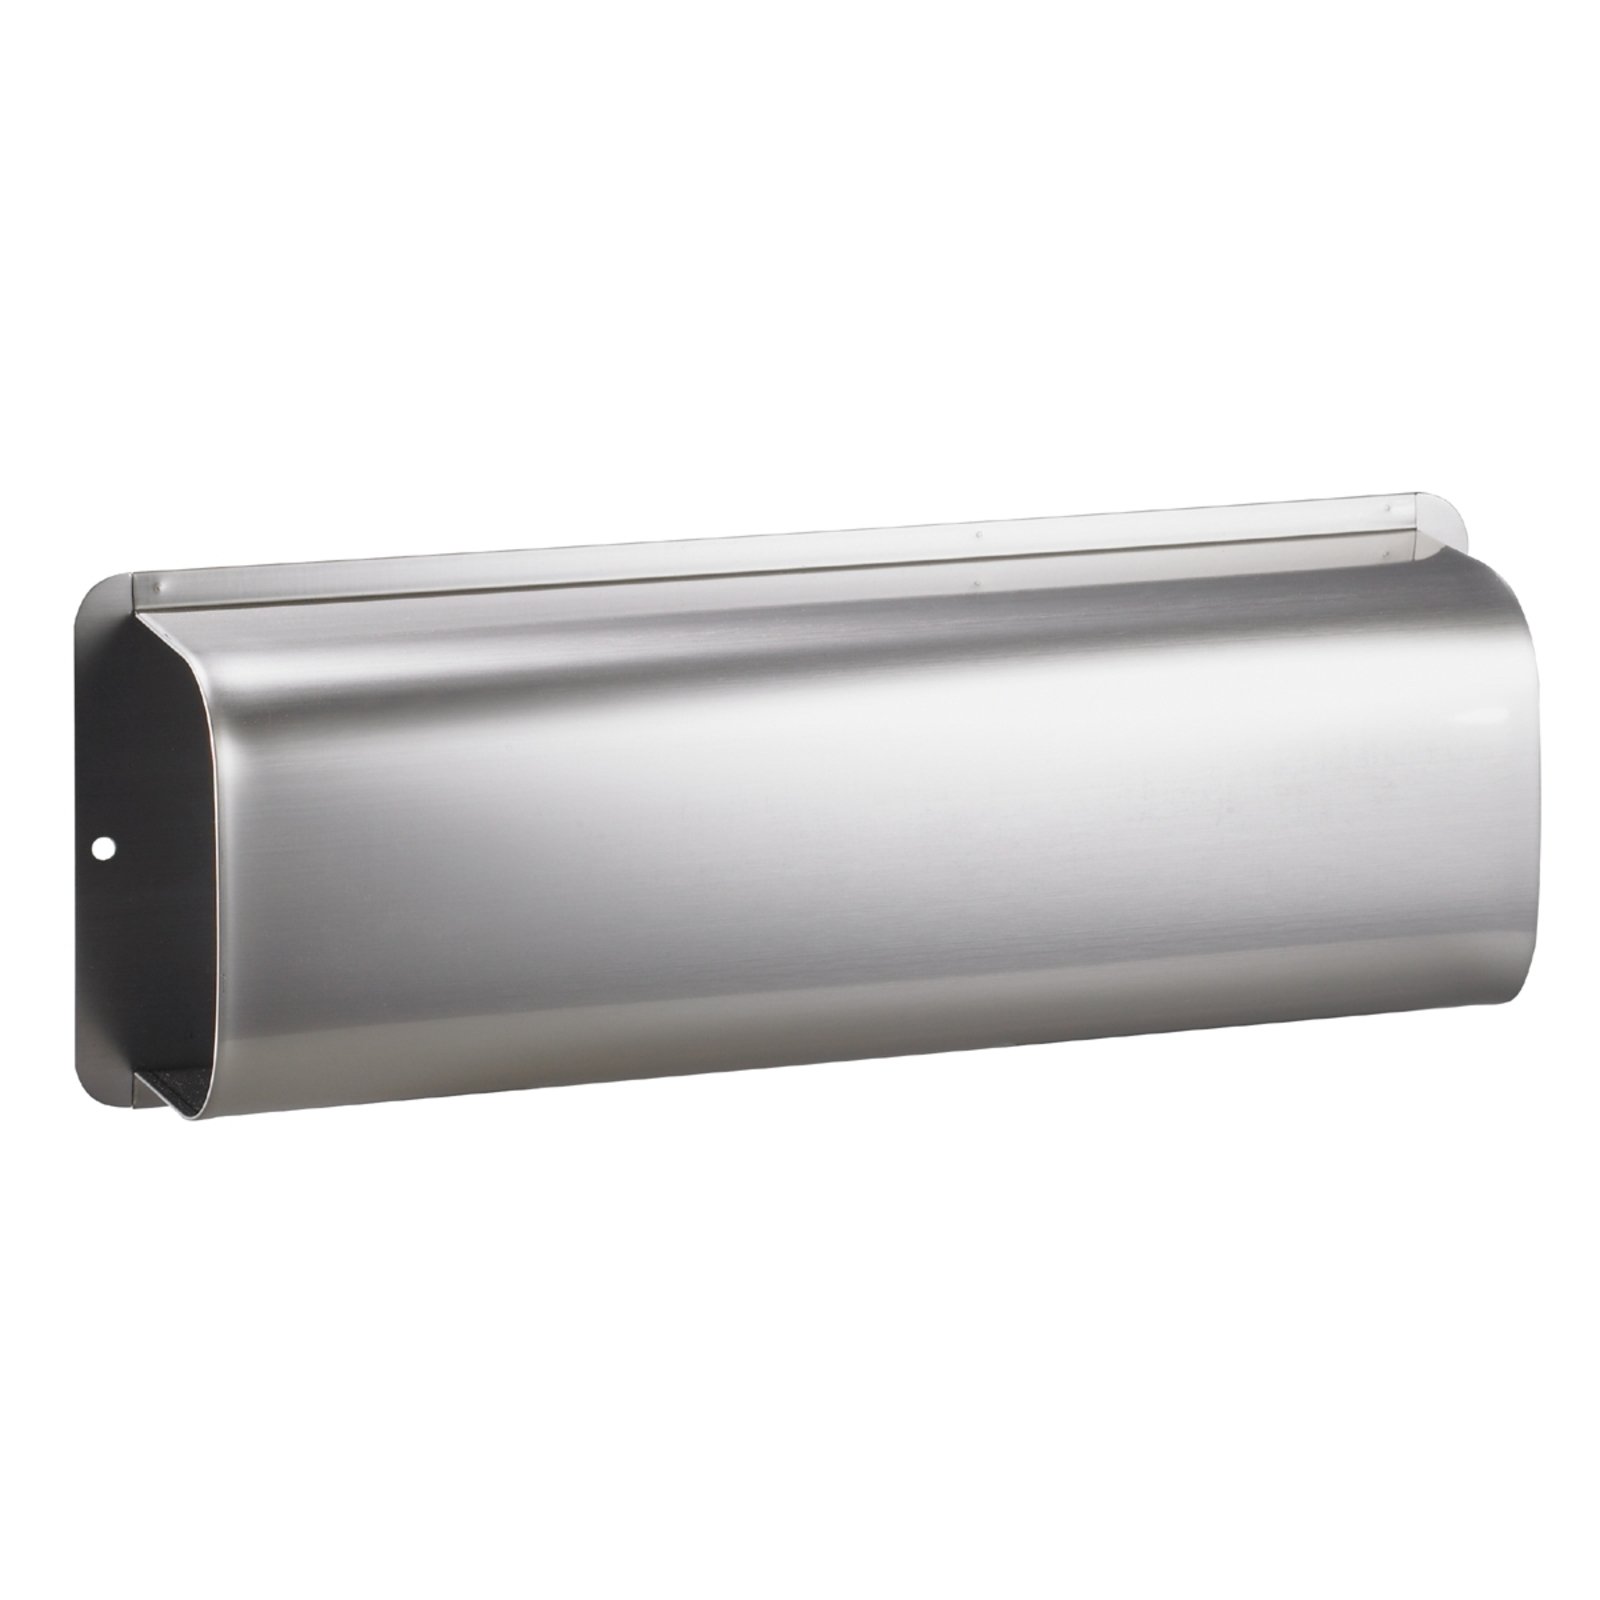 Newspaper box stainless steel for letterbox RAIN